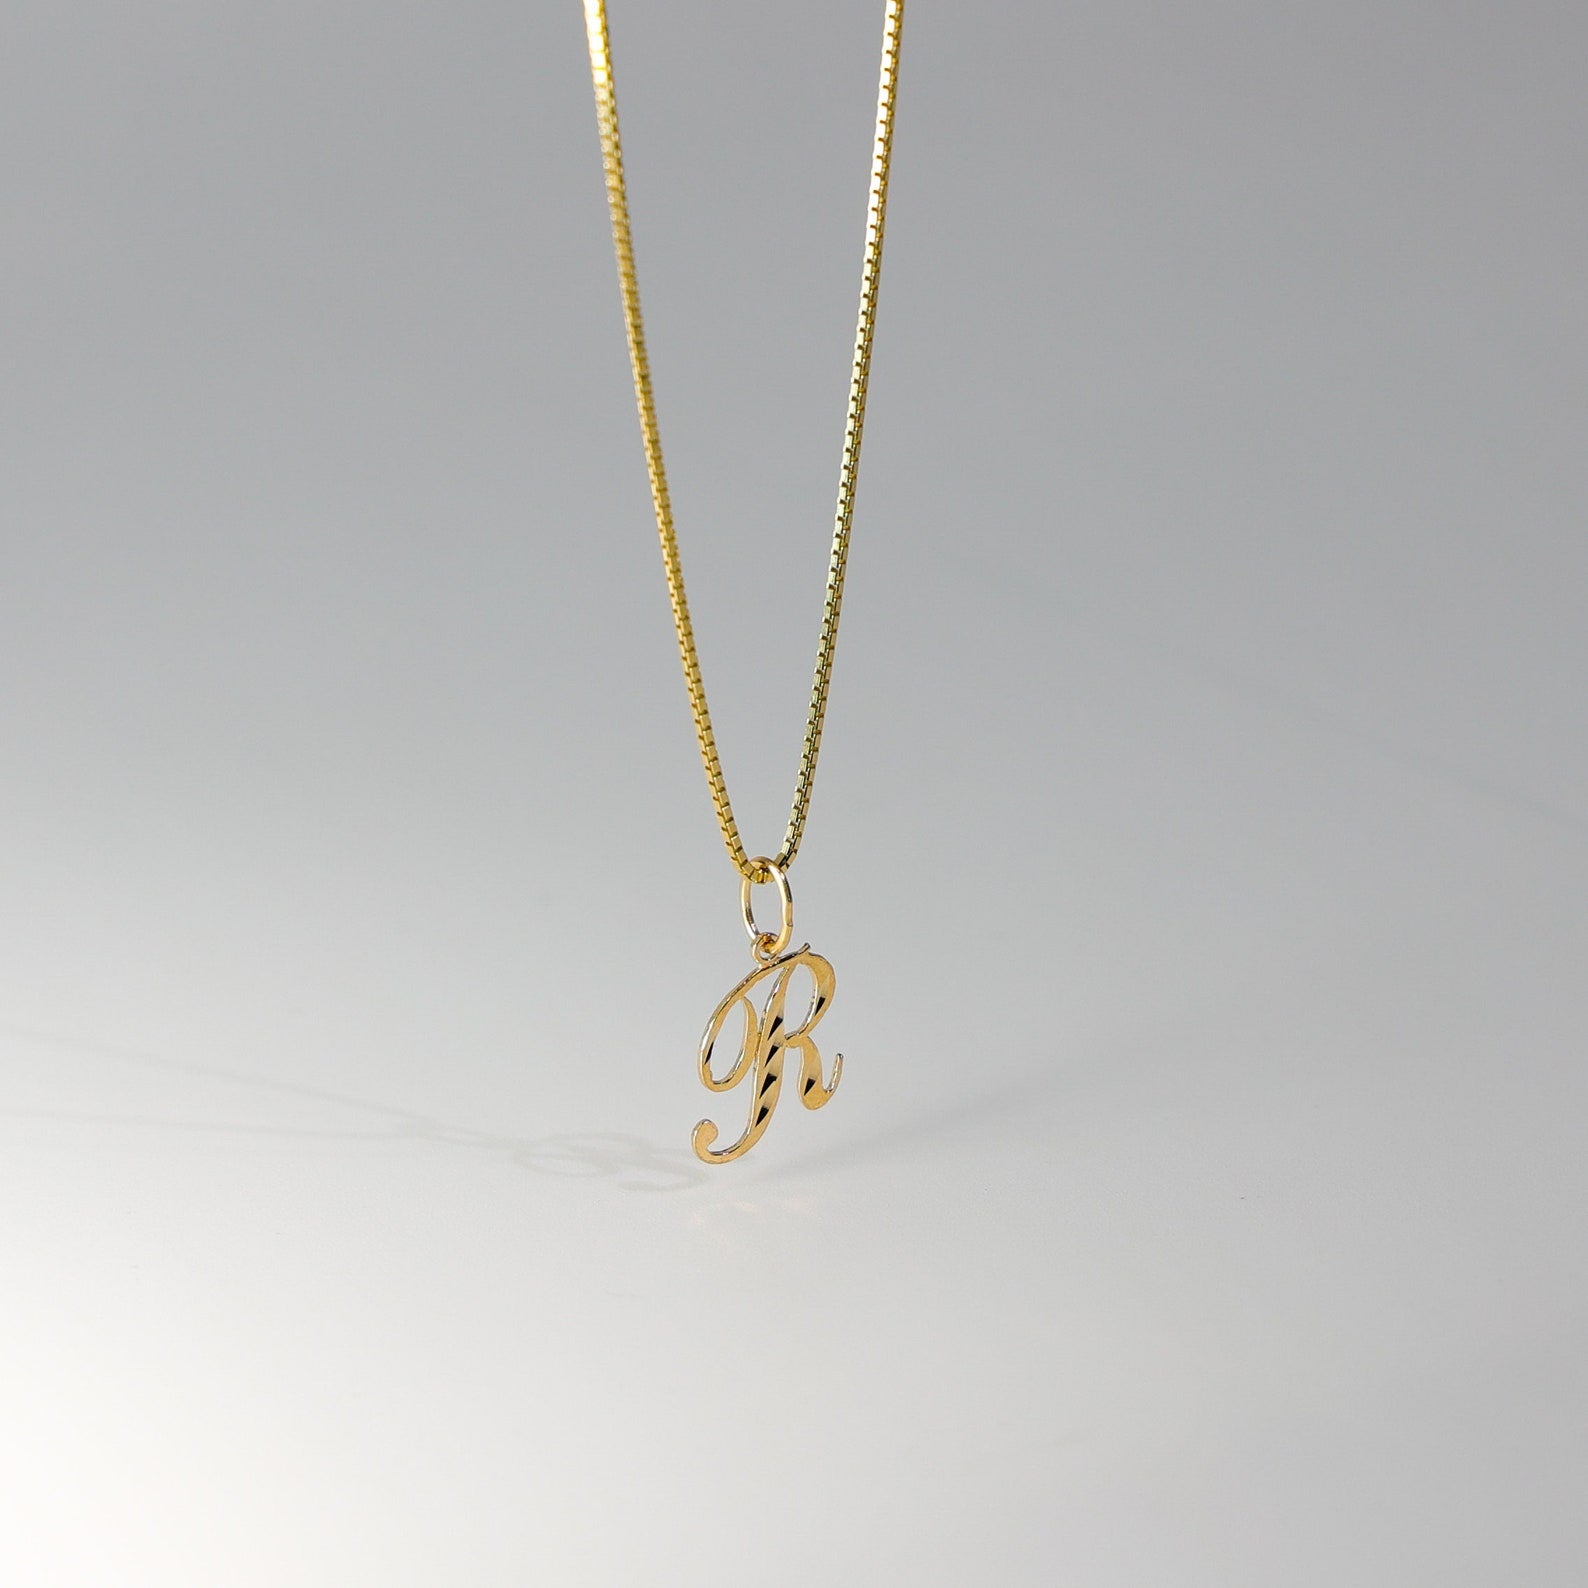 Gold Calligraphy Letter R Pendant | A-Z Pendants - Charlie & Co. Jewelry